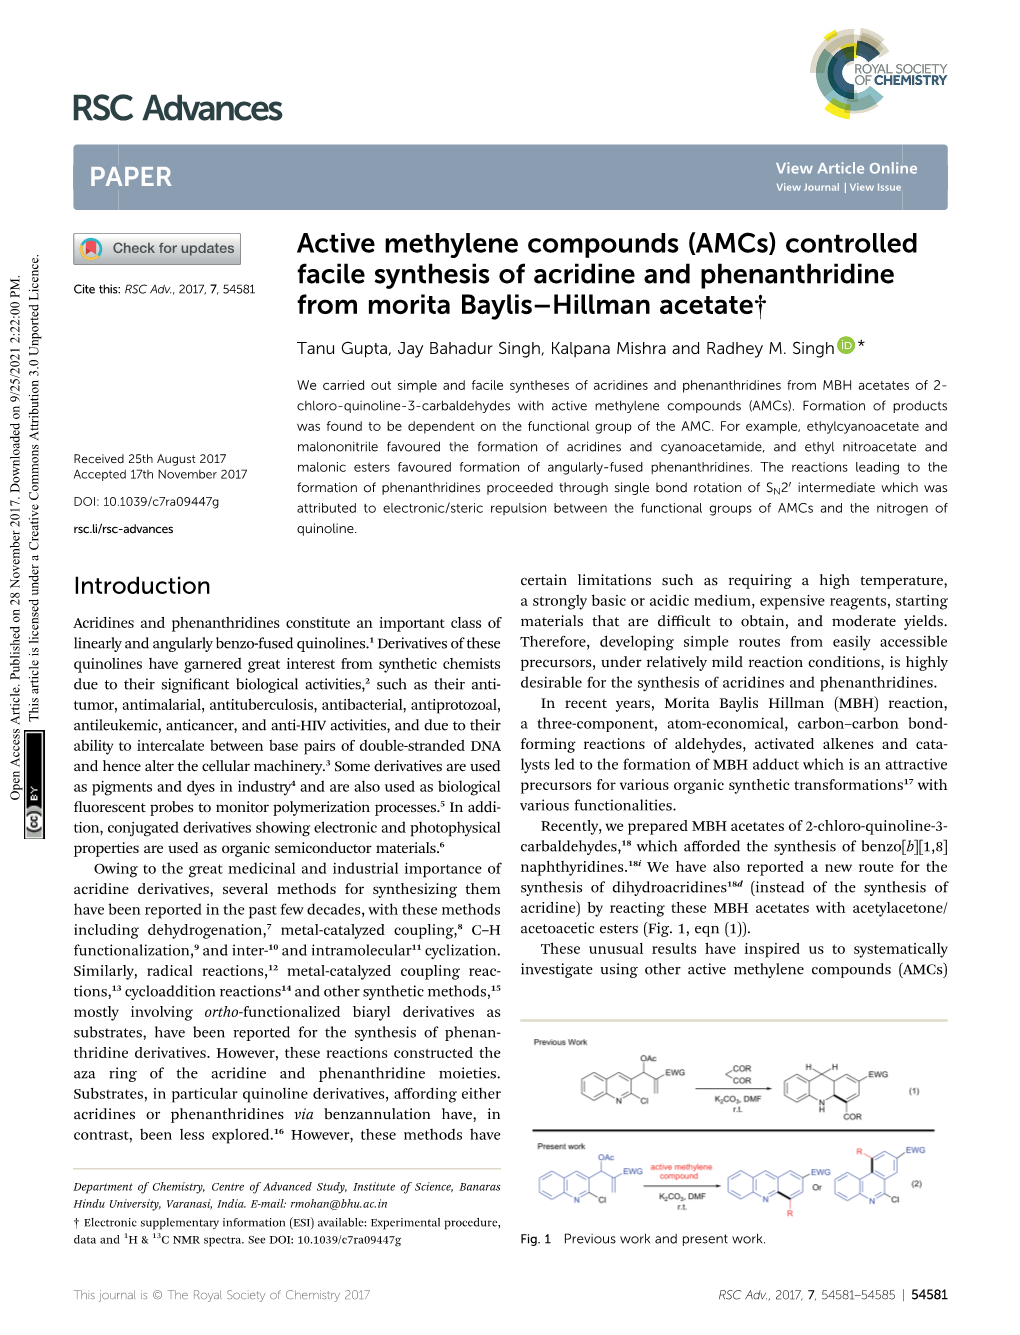 Active Methylene Compounds (Amcs) Controlled Facile Synthesis of Acridine and Phenanthridine Cite This: RSC Adv.,2017,7, 54581 from Morita Baylis–Hillman Acetate†